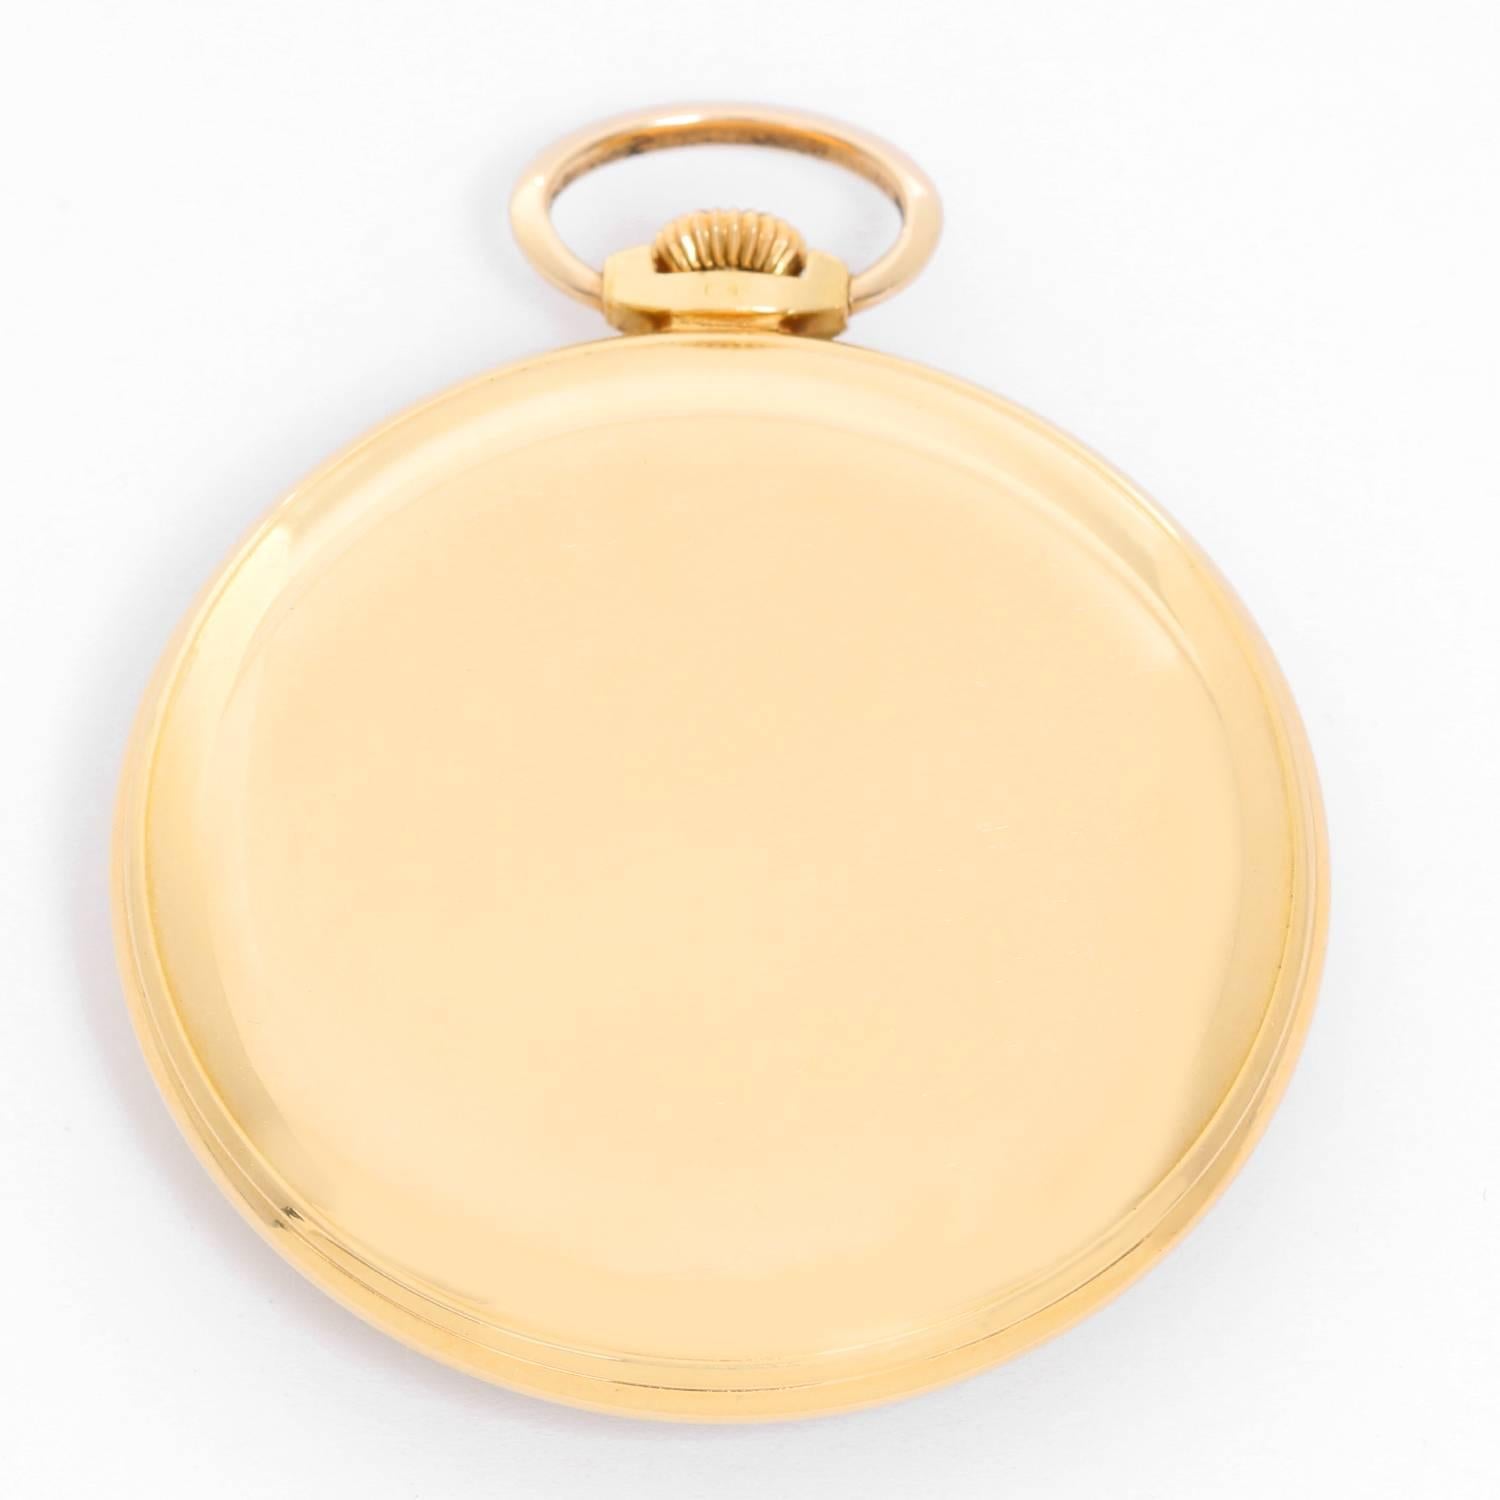 Patek Philippe & Co. 18K Gold Open Face Pocket Watch -  Manual movement. 18K Yellow Gold Case, monogrammed. Signed Patek Philippe & Co. ( 44 mm ). Gold with Arabic numerals; sub dial at 6' o clock.. Pre-owned with original certificate of origin and